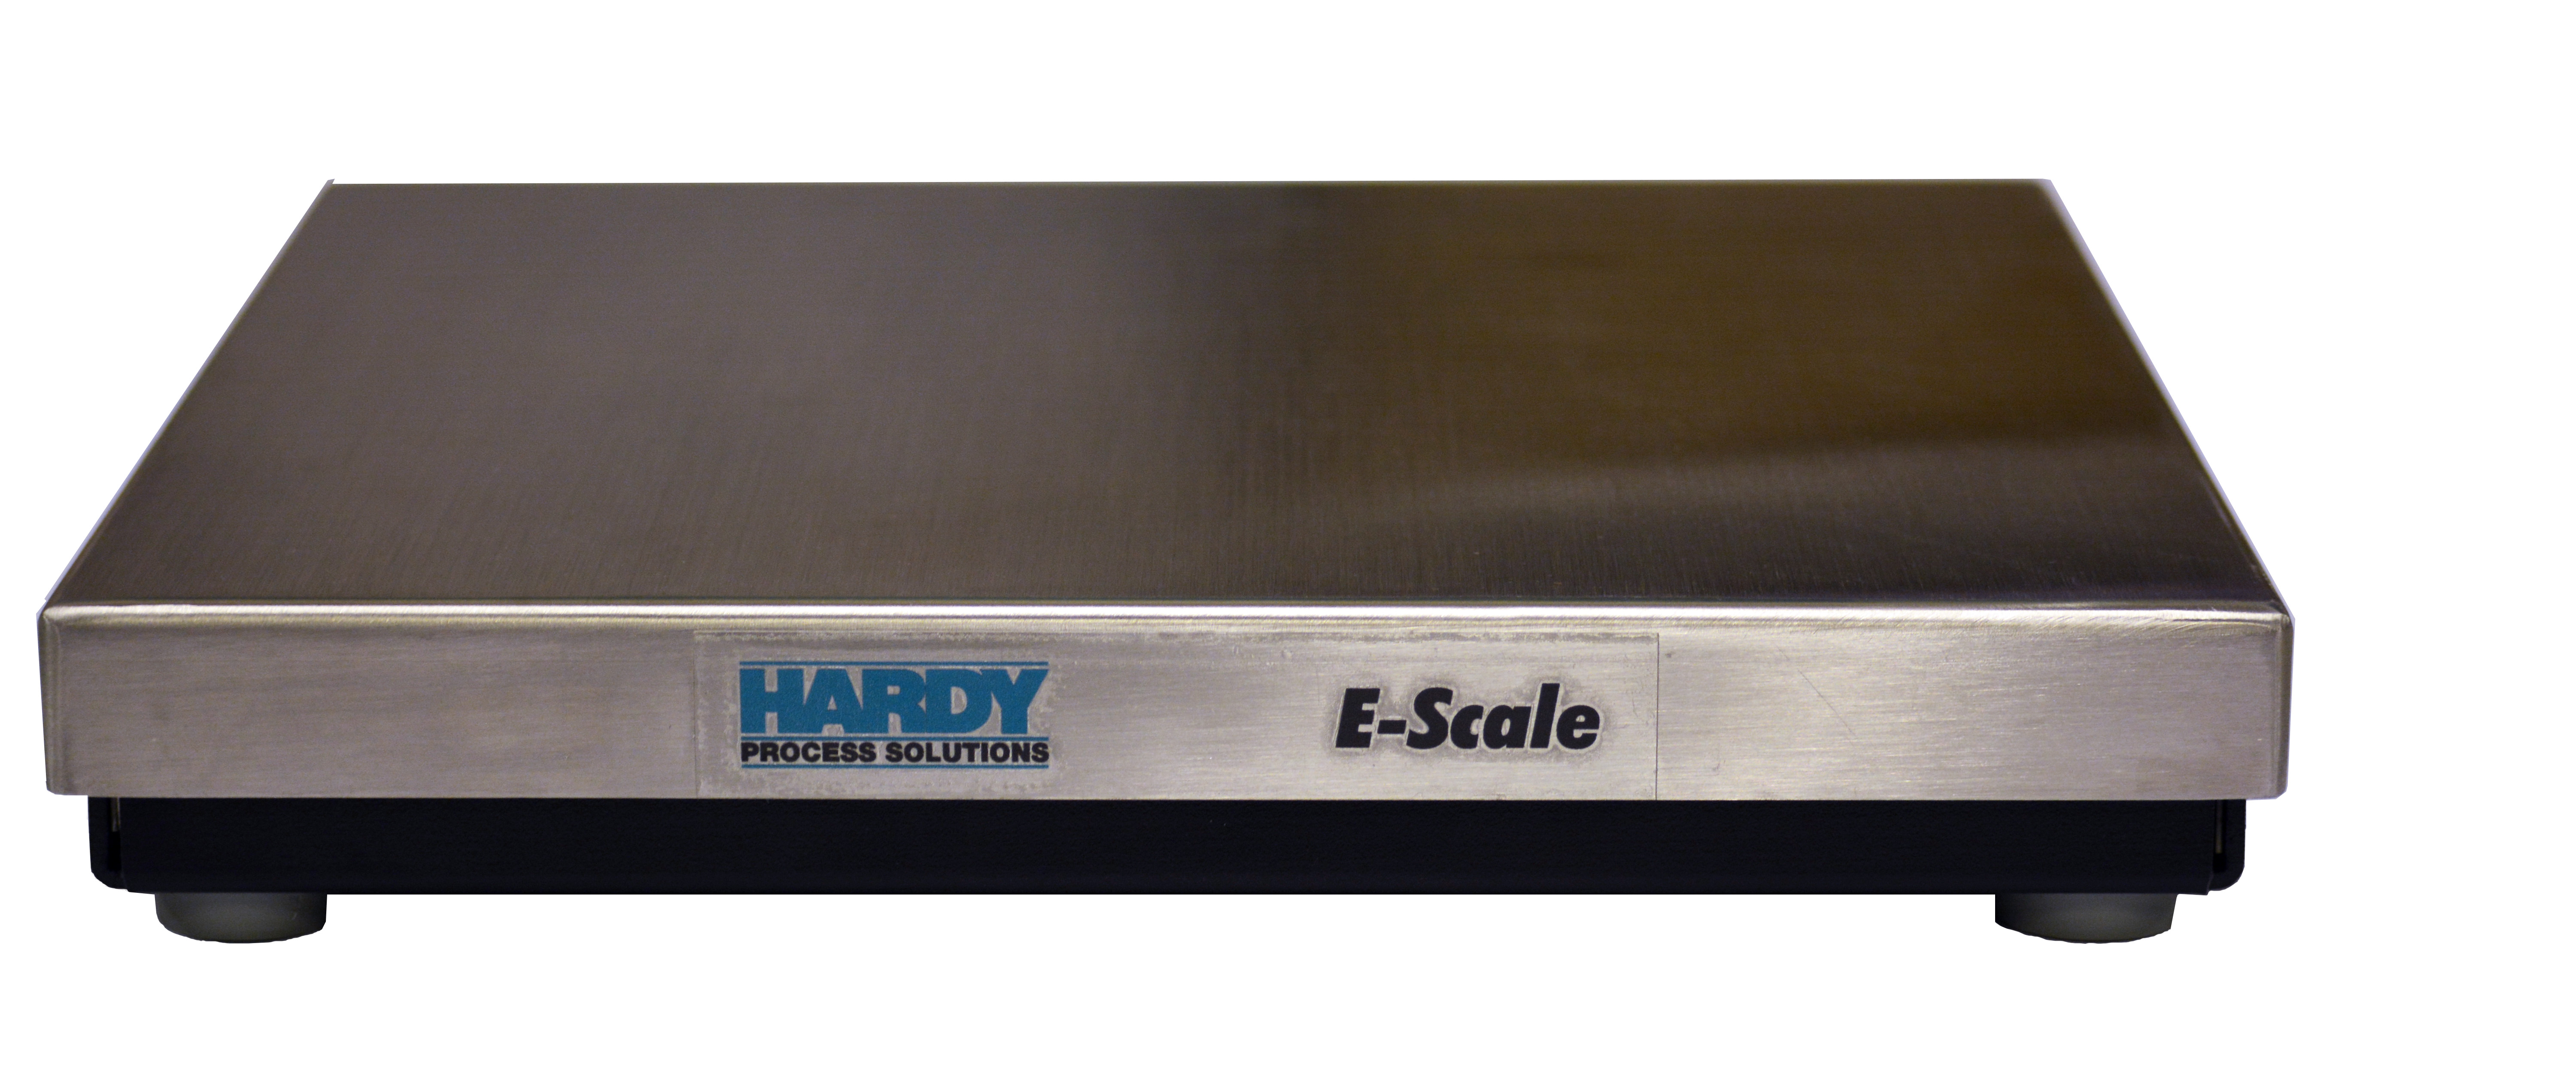 Hardy E-Scale IIoT Ready Intelligent Scale System